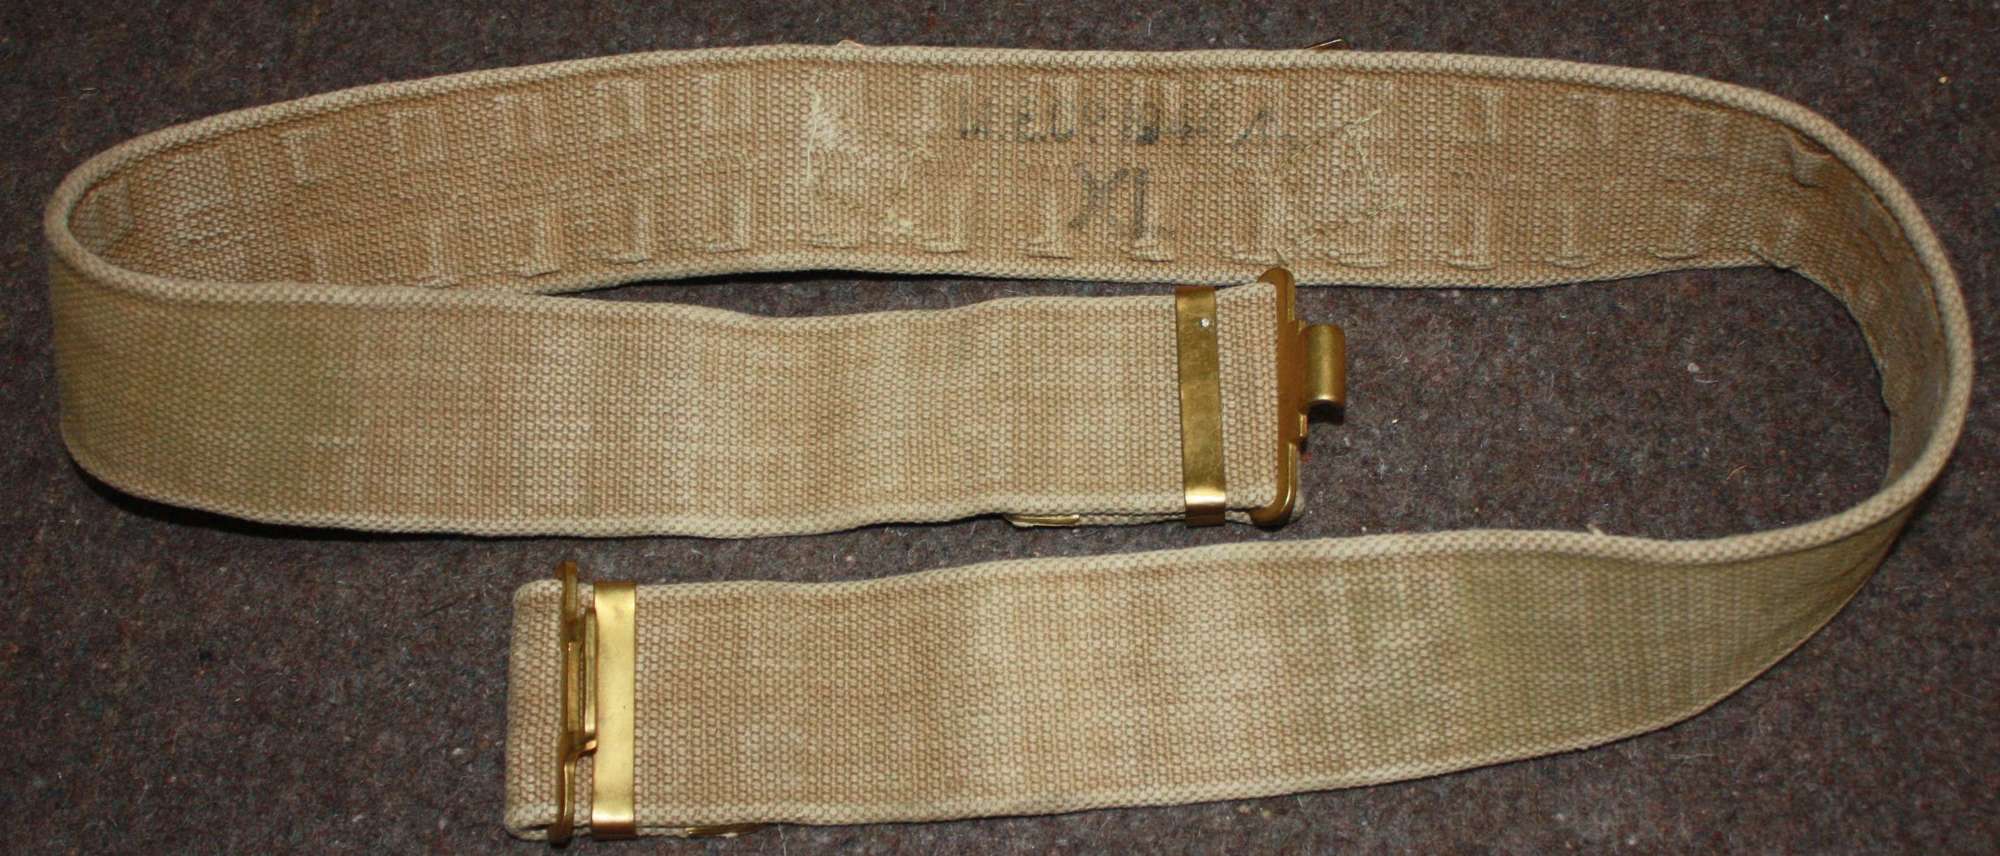 A WWII 1944 MECO MADE LARGE SIZE 37 PATTERN WEBBING BELT